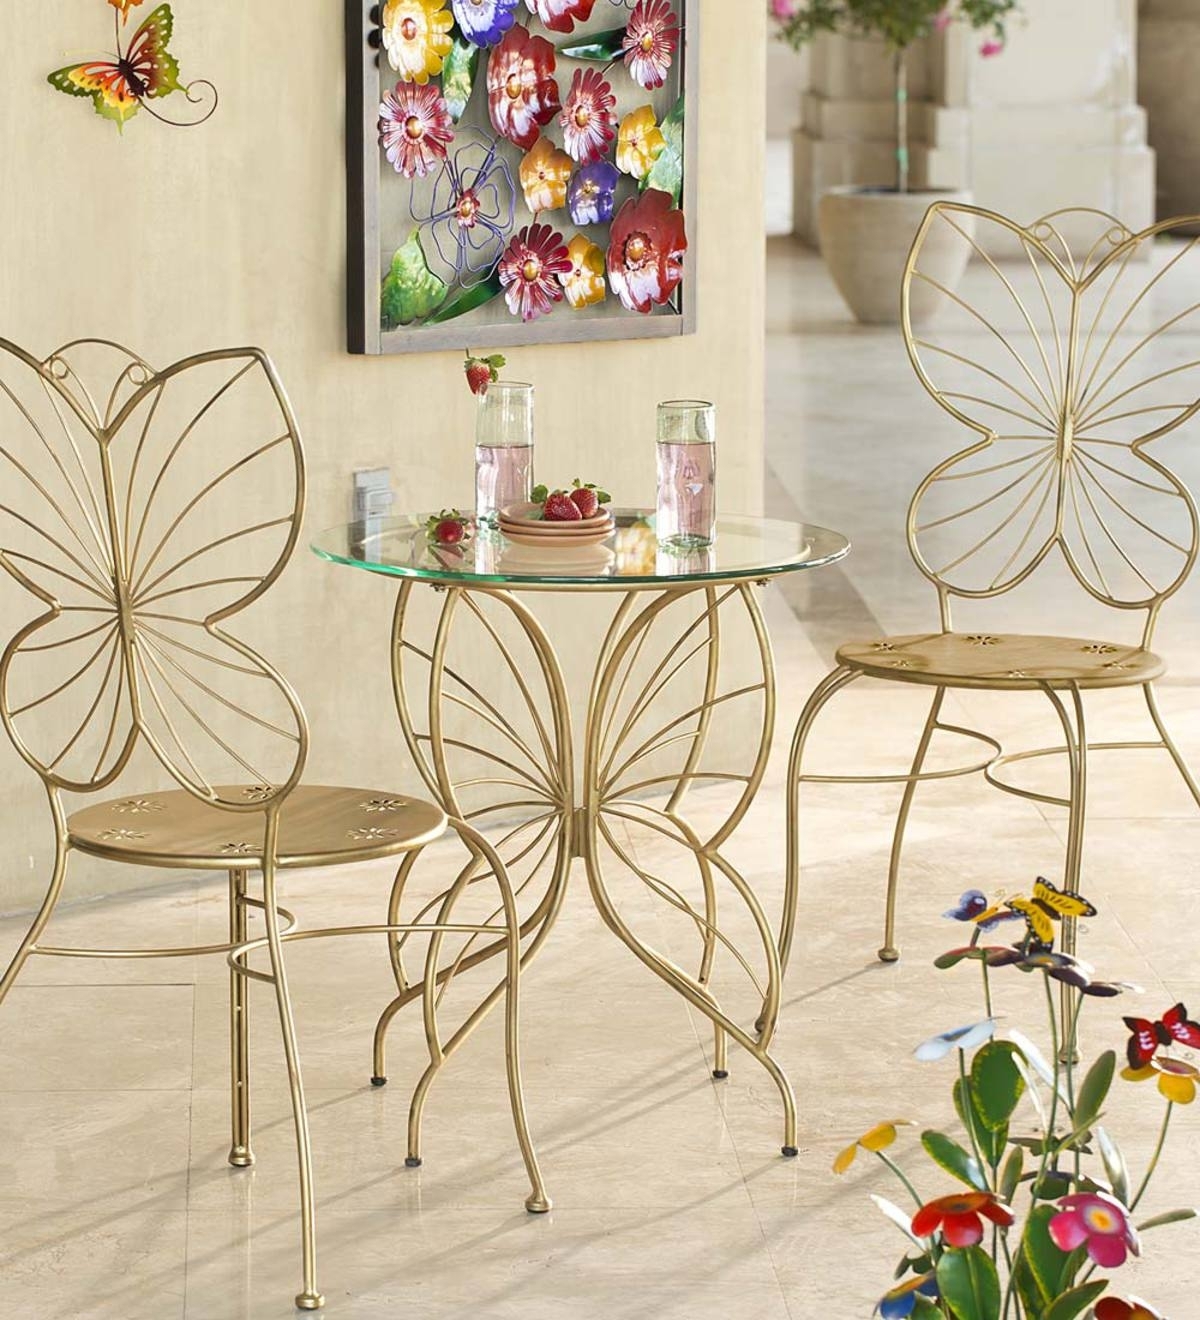 4 Pcs Metal Butterfly Wall Decor Hanging Decoration Butterfly Wall Art Sculpture Garden 3D Butterfly for Indoor Outdoor Backyard Living Room Bedroom Porch Patio Fence Home Decor 